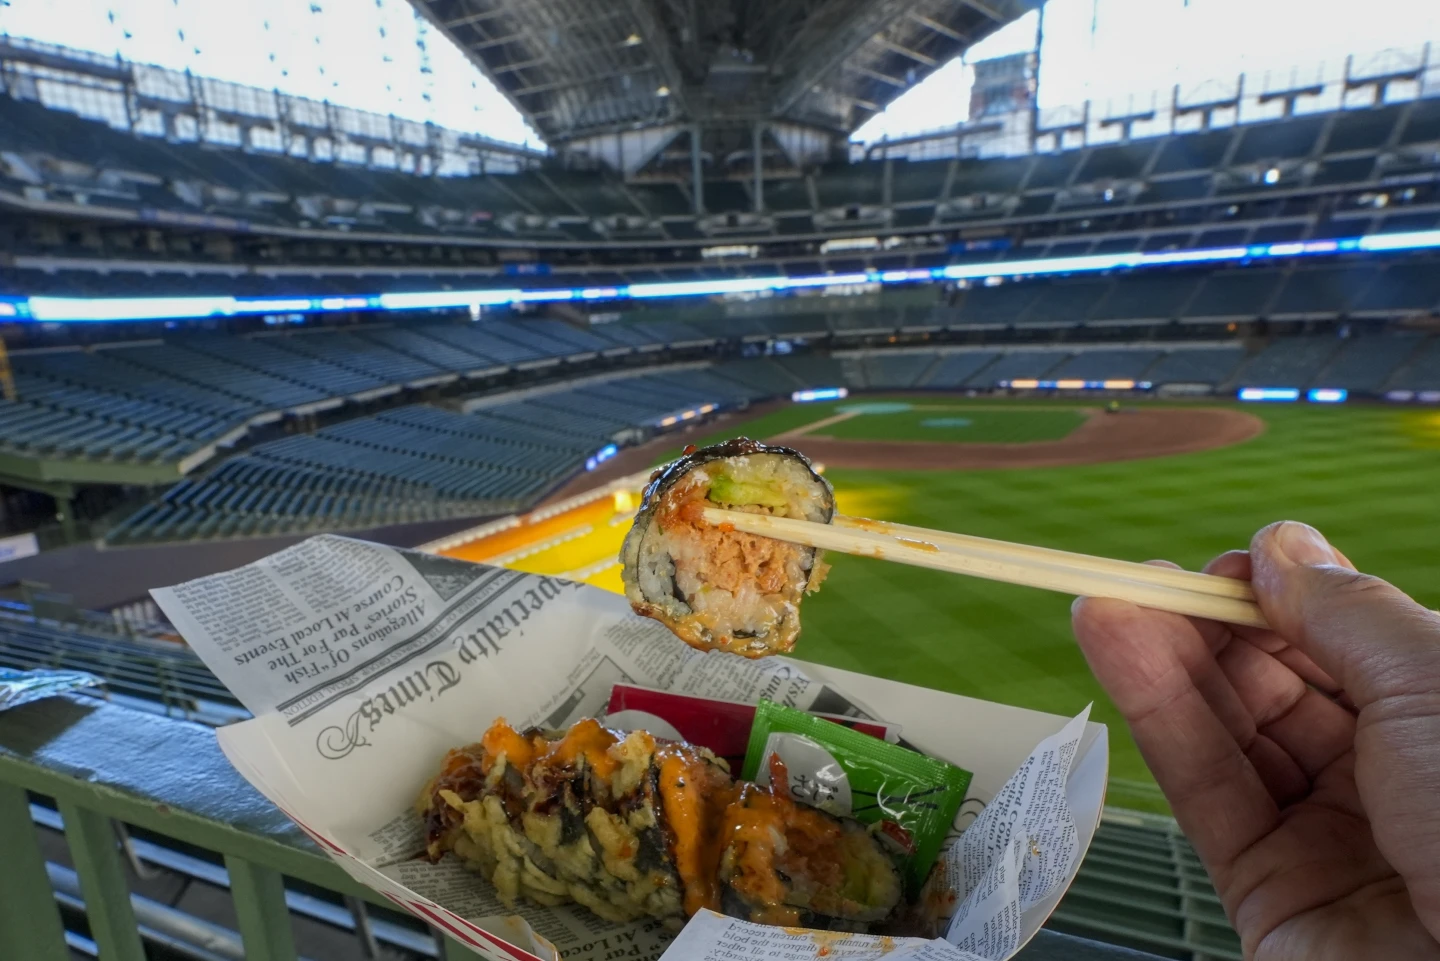 The culinary game at MLB ballparks has exploded in the past 20 years. Eating healthy is a challenge